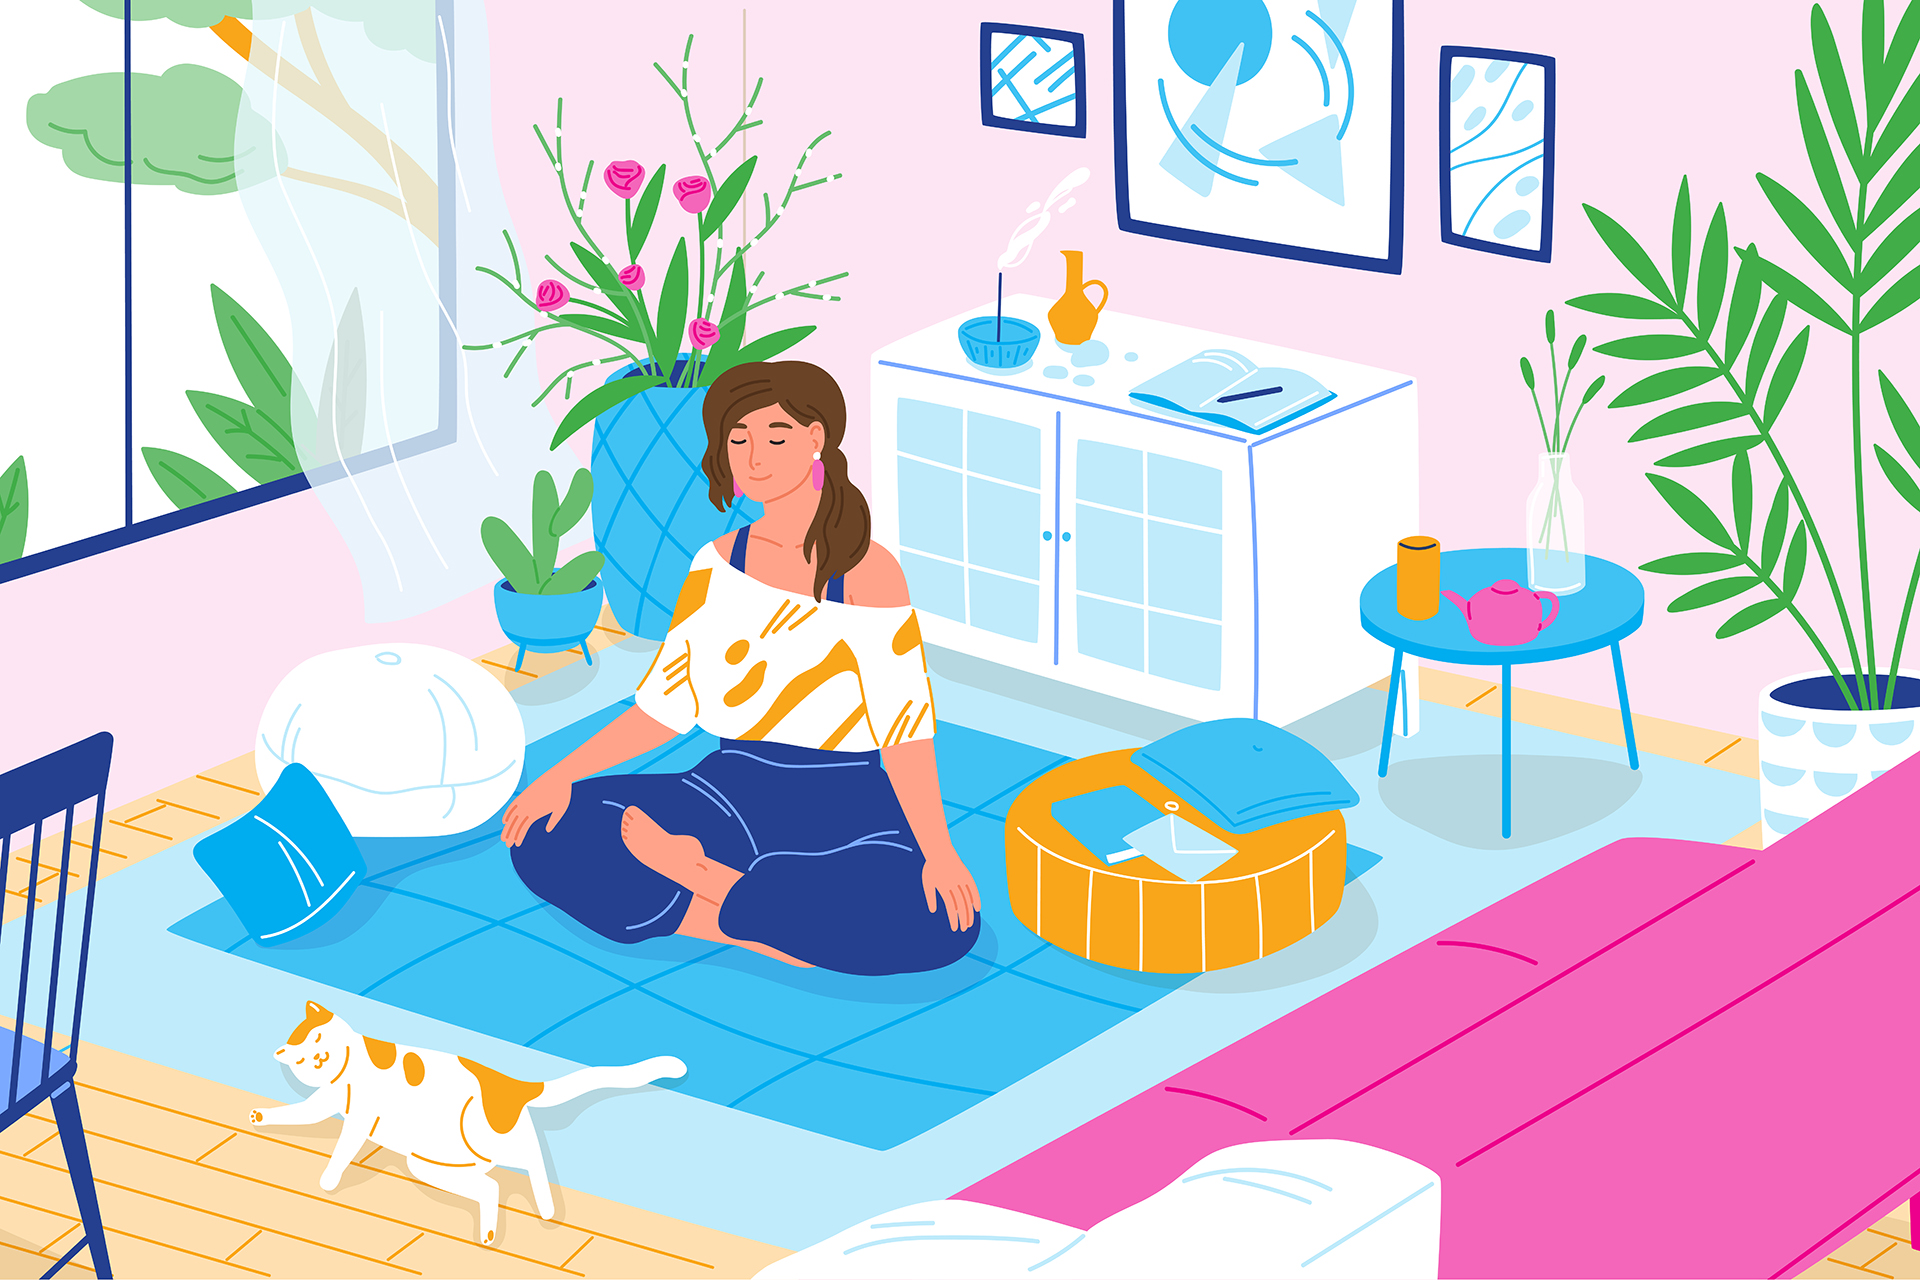 End PMS Anxiety with Therapist-Designed Guided Meditations in 8